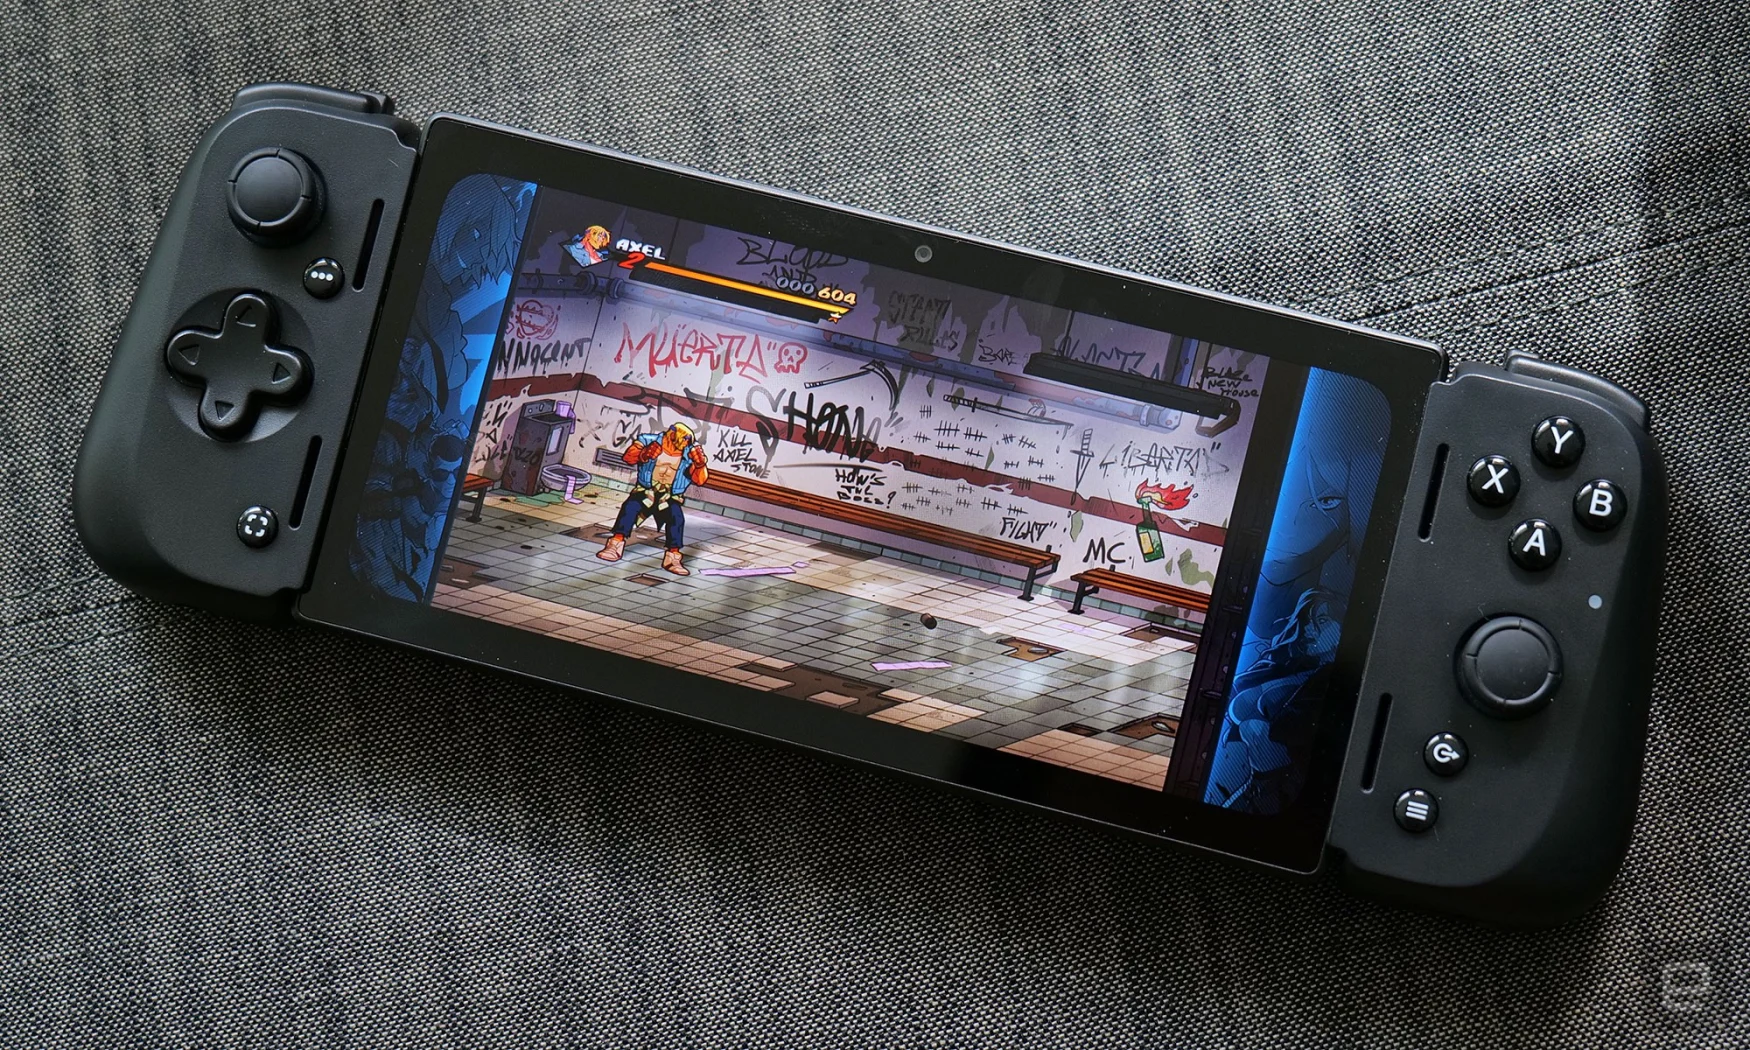 In games like Streets of Rage 4 with native controller support, the Razer Edge will automatically detect that which makes setup extremely easy. 